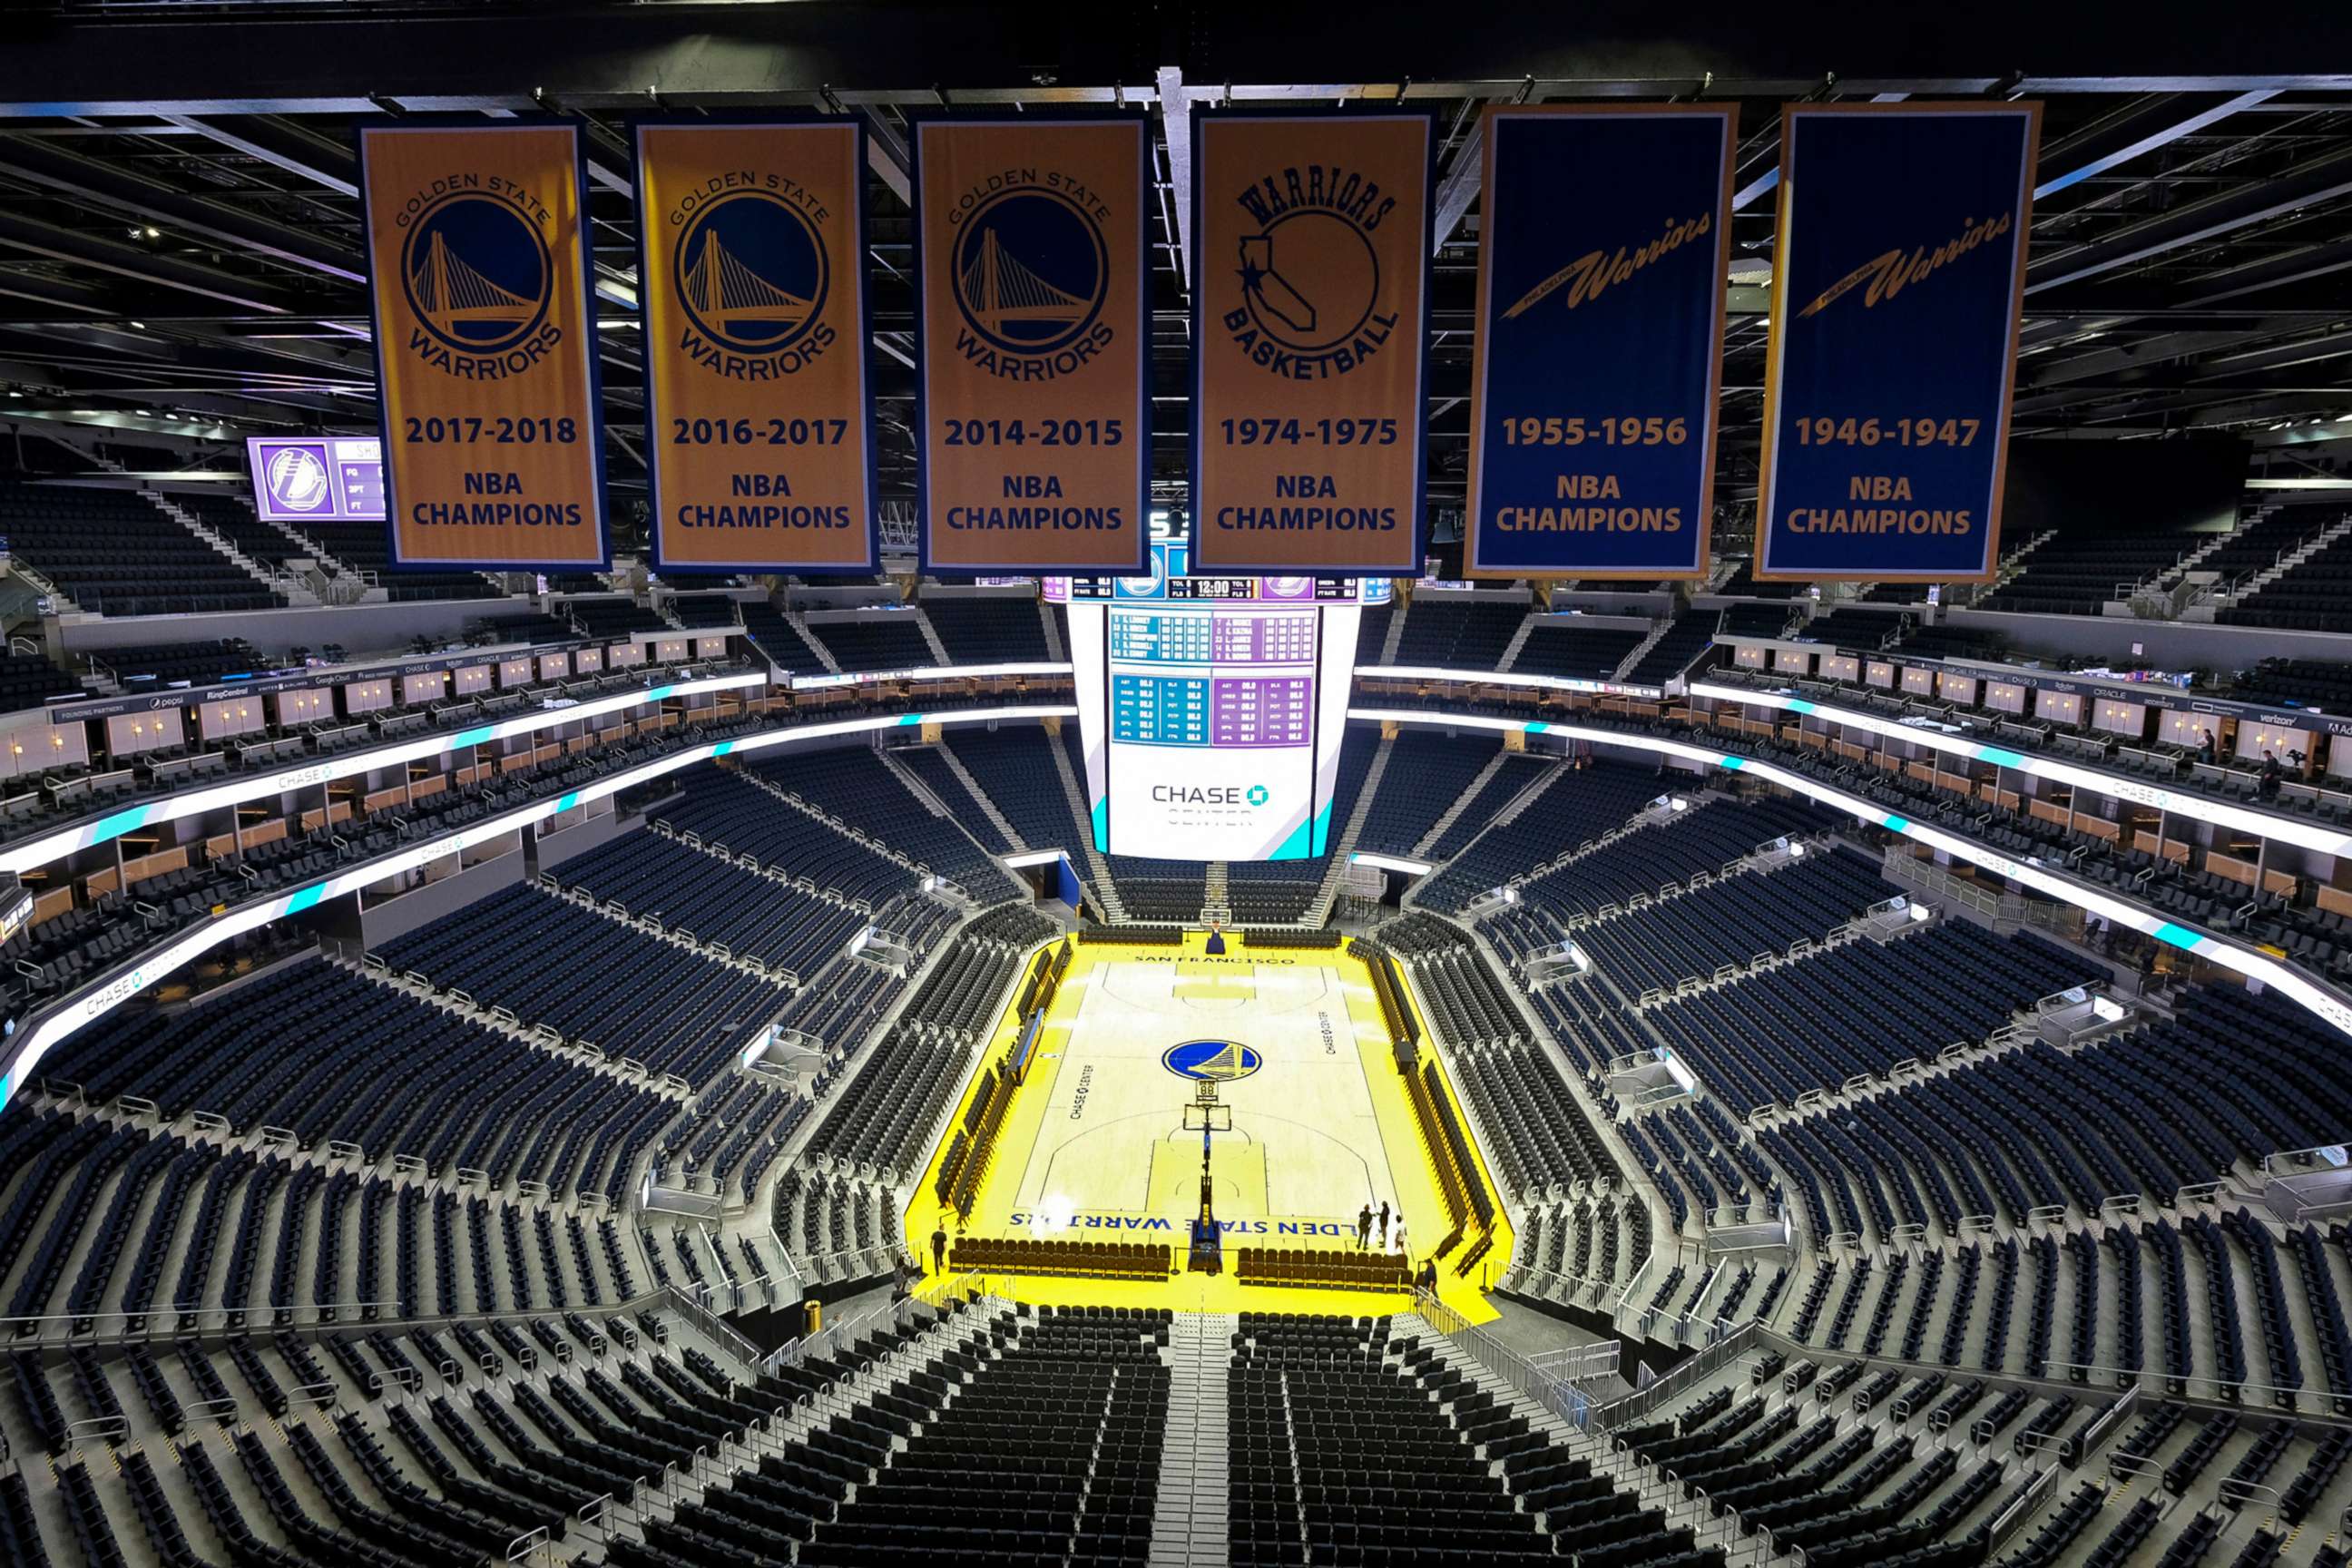 PHOTO: The Golden State Warriors championship banners hang above the seating and basketball court at the Chase Center in San Francisco, Aug. 26, 2019.